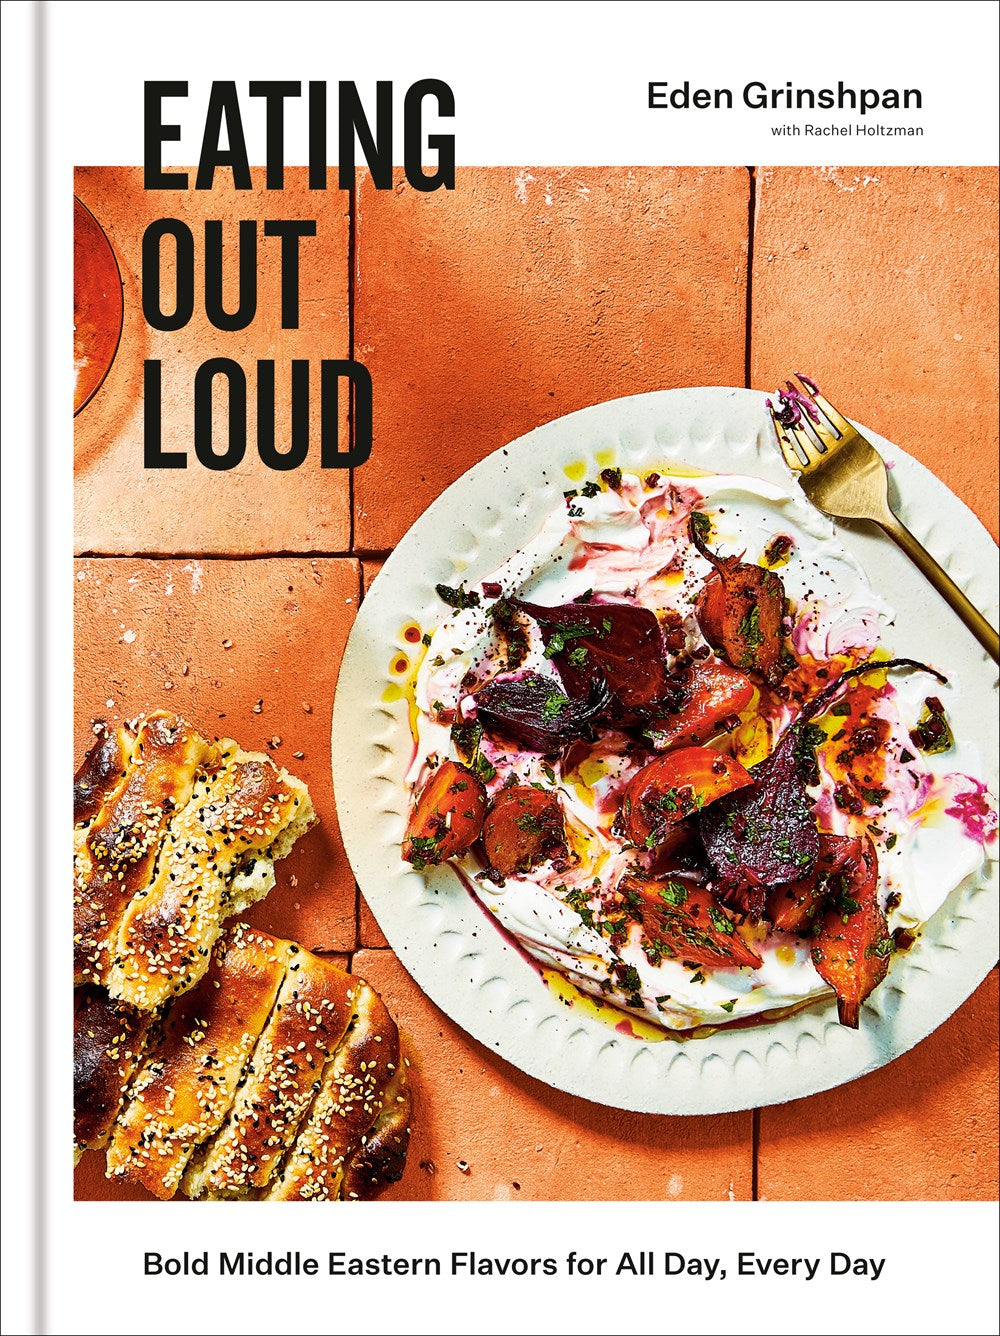 Eating Out Loud: Bold, Middle Eastern Flavors for All Day, Every Day by Eden Grinshpan (with Rachel Holtzman)